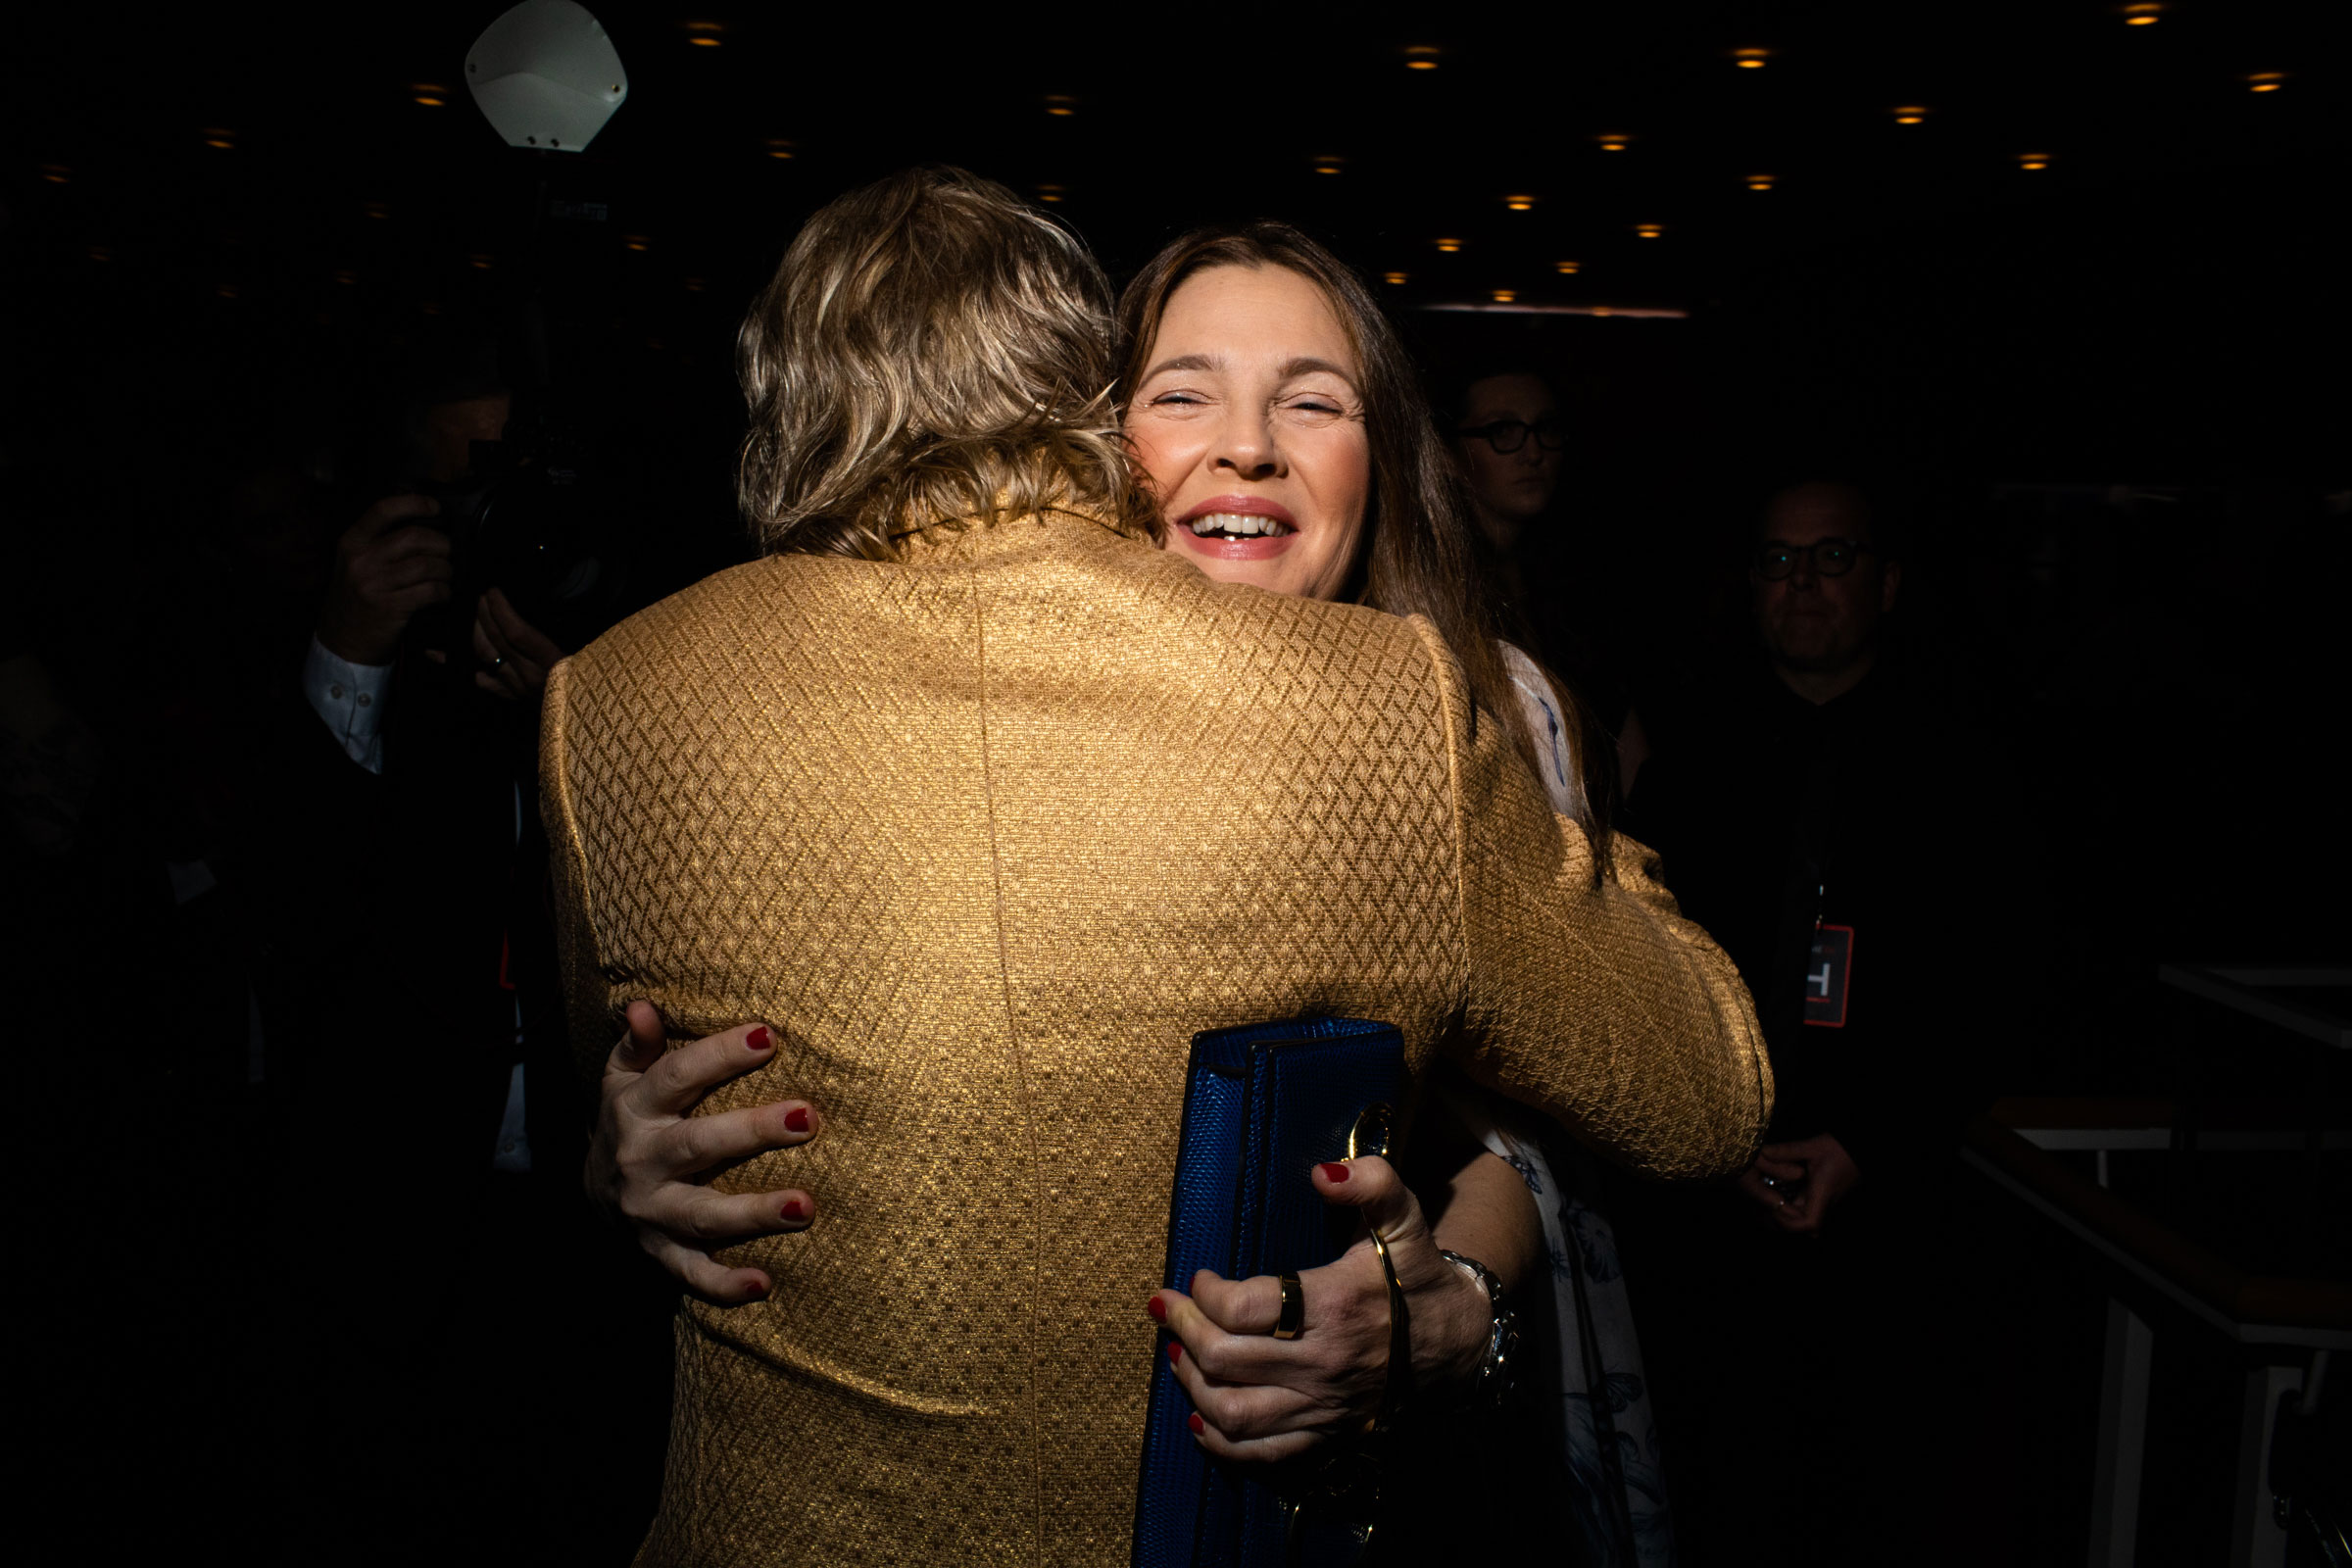 Drew Barrymore hugs activist, journalist and lawyer, Ronan Farrow at the TIME 100 Gala at Jazz at Lincoln Center in New York City, on April 26, 2023. (Landon Nordeman for TIME)